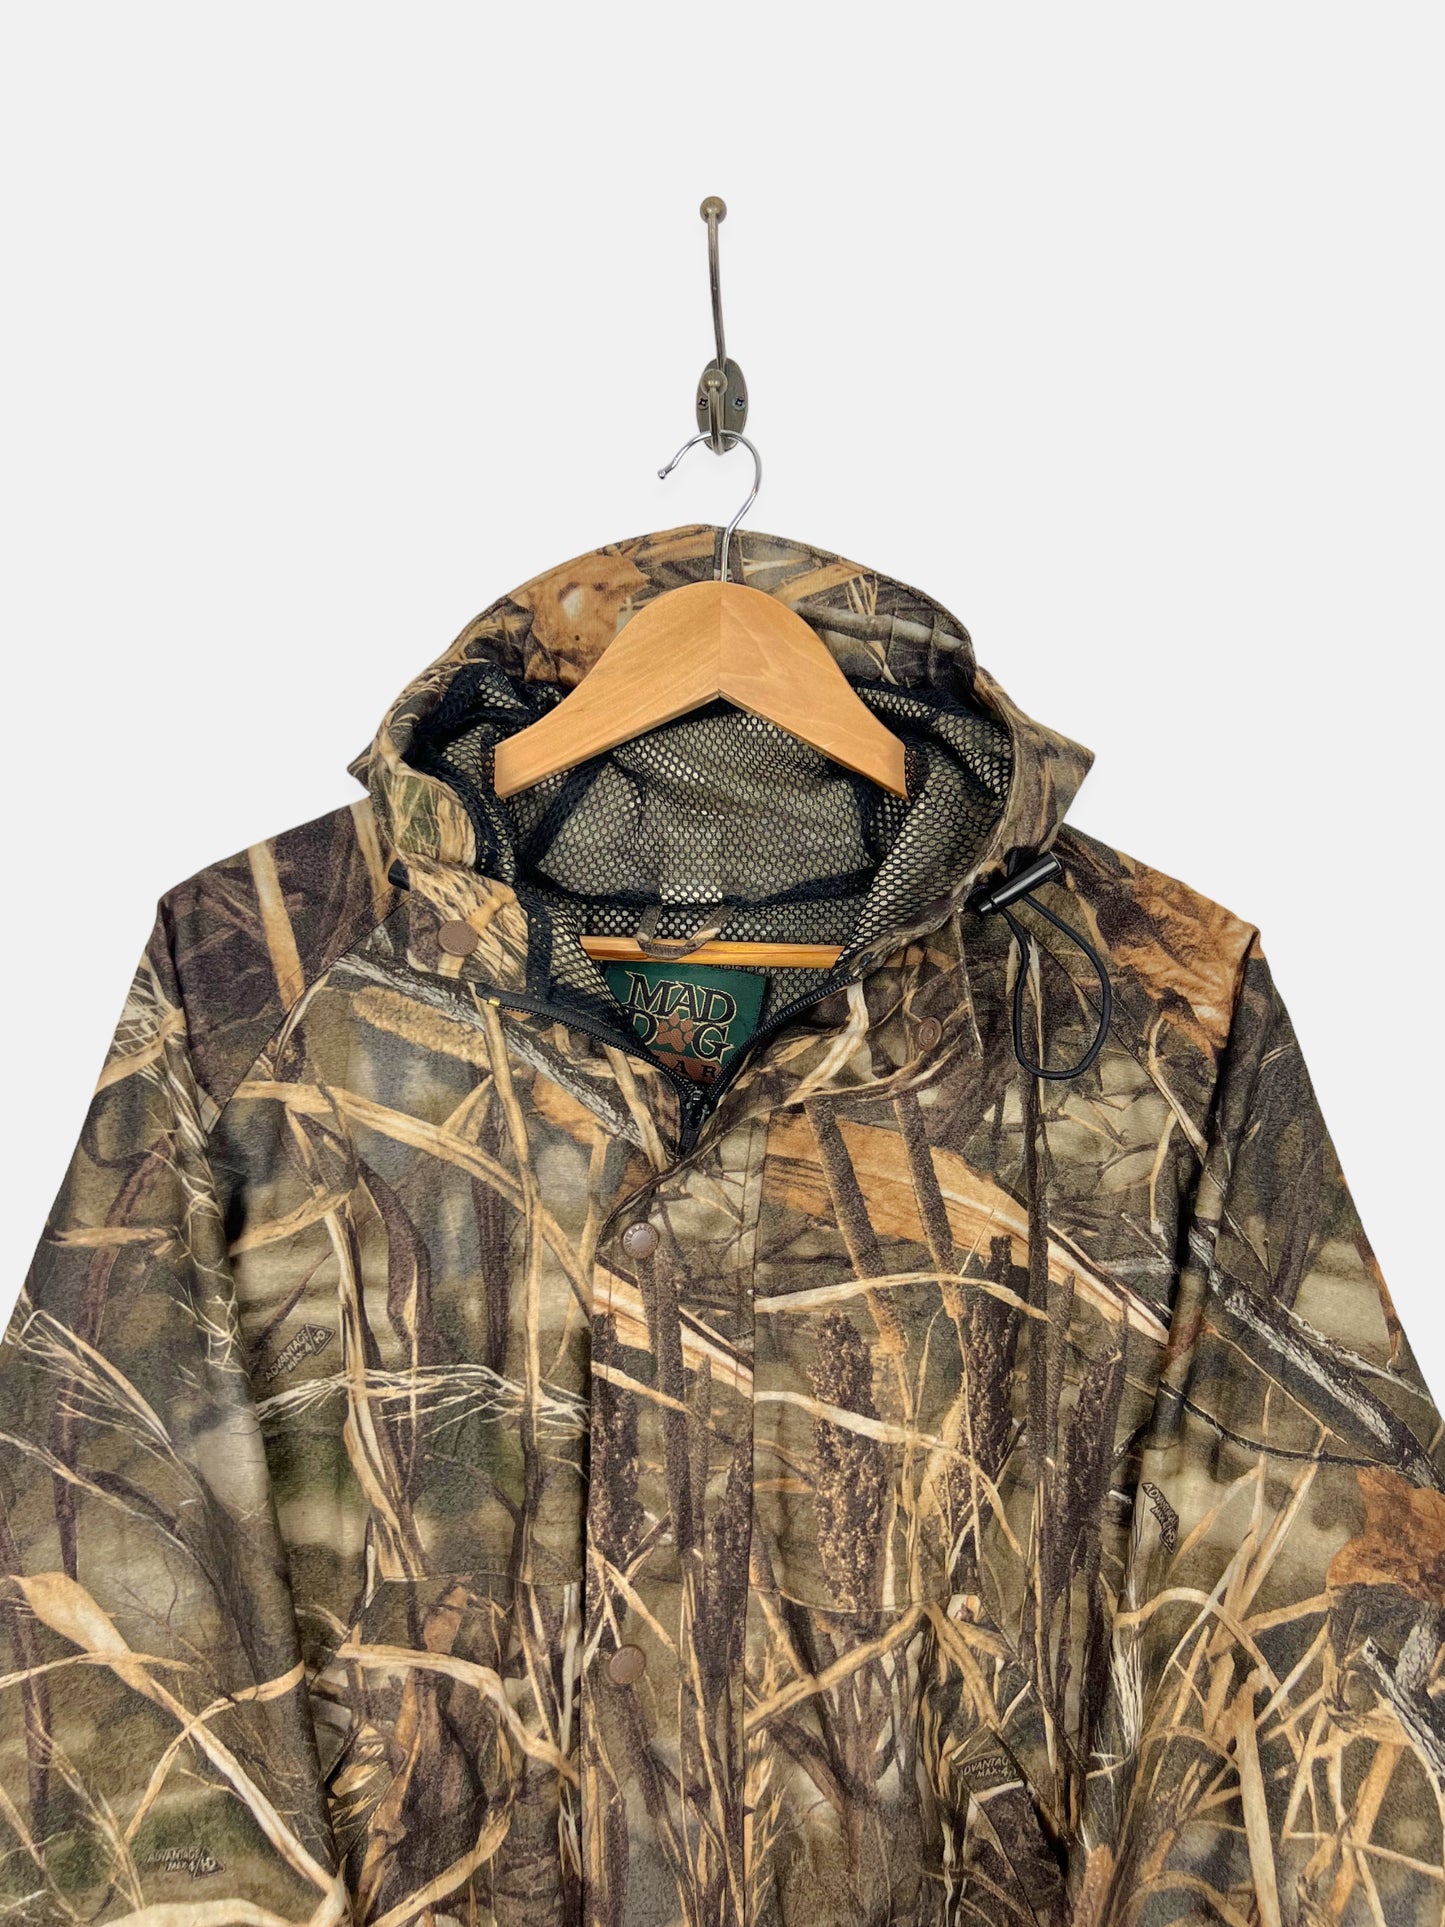 90's Realtree Vintage Jacket with Hood Size M